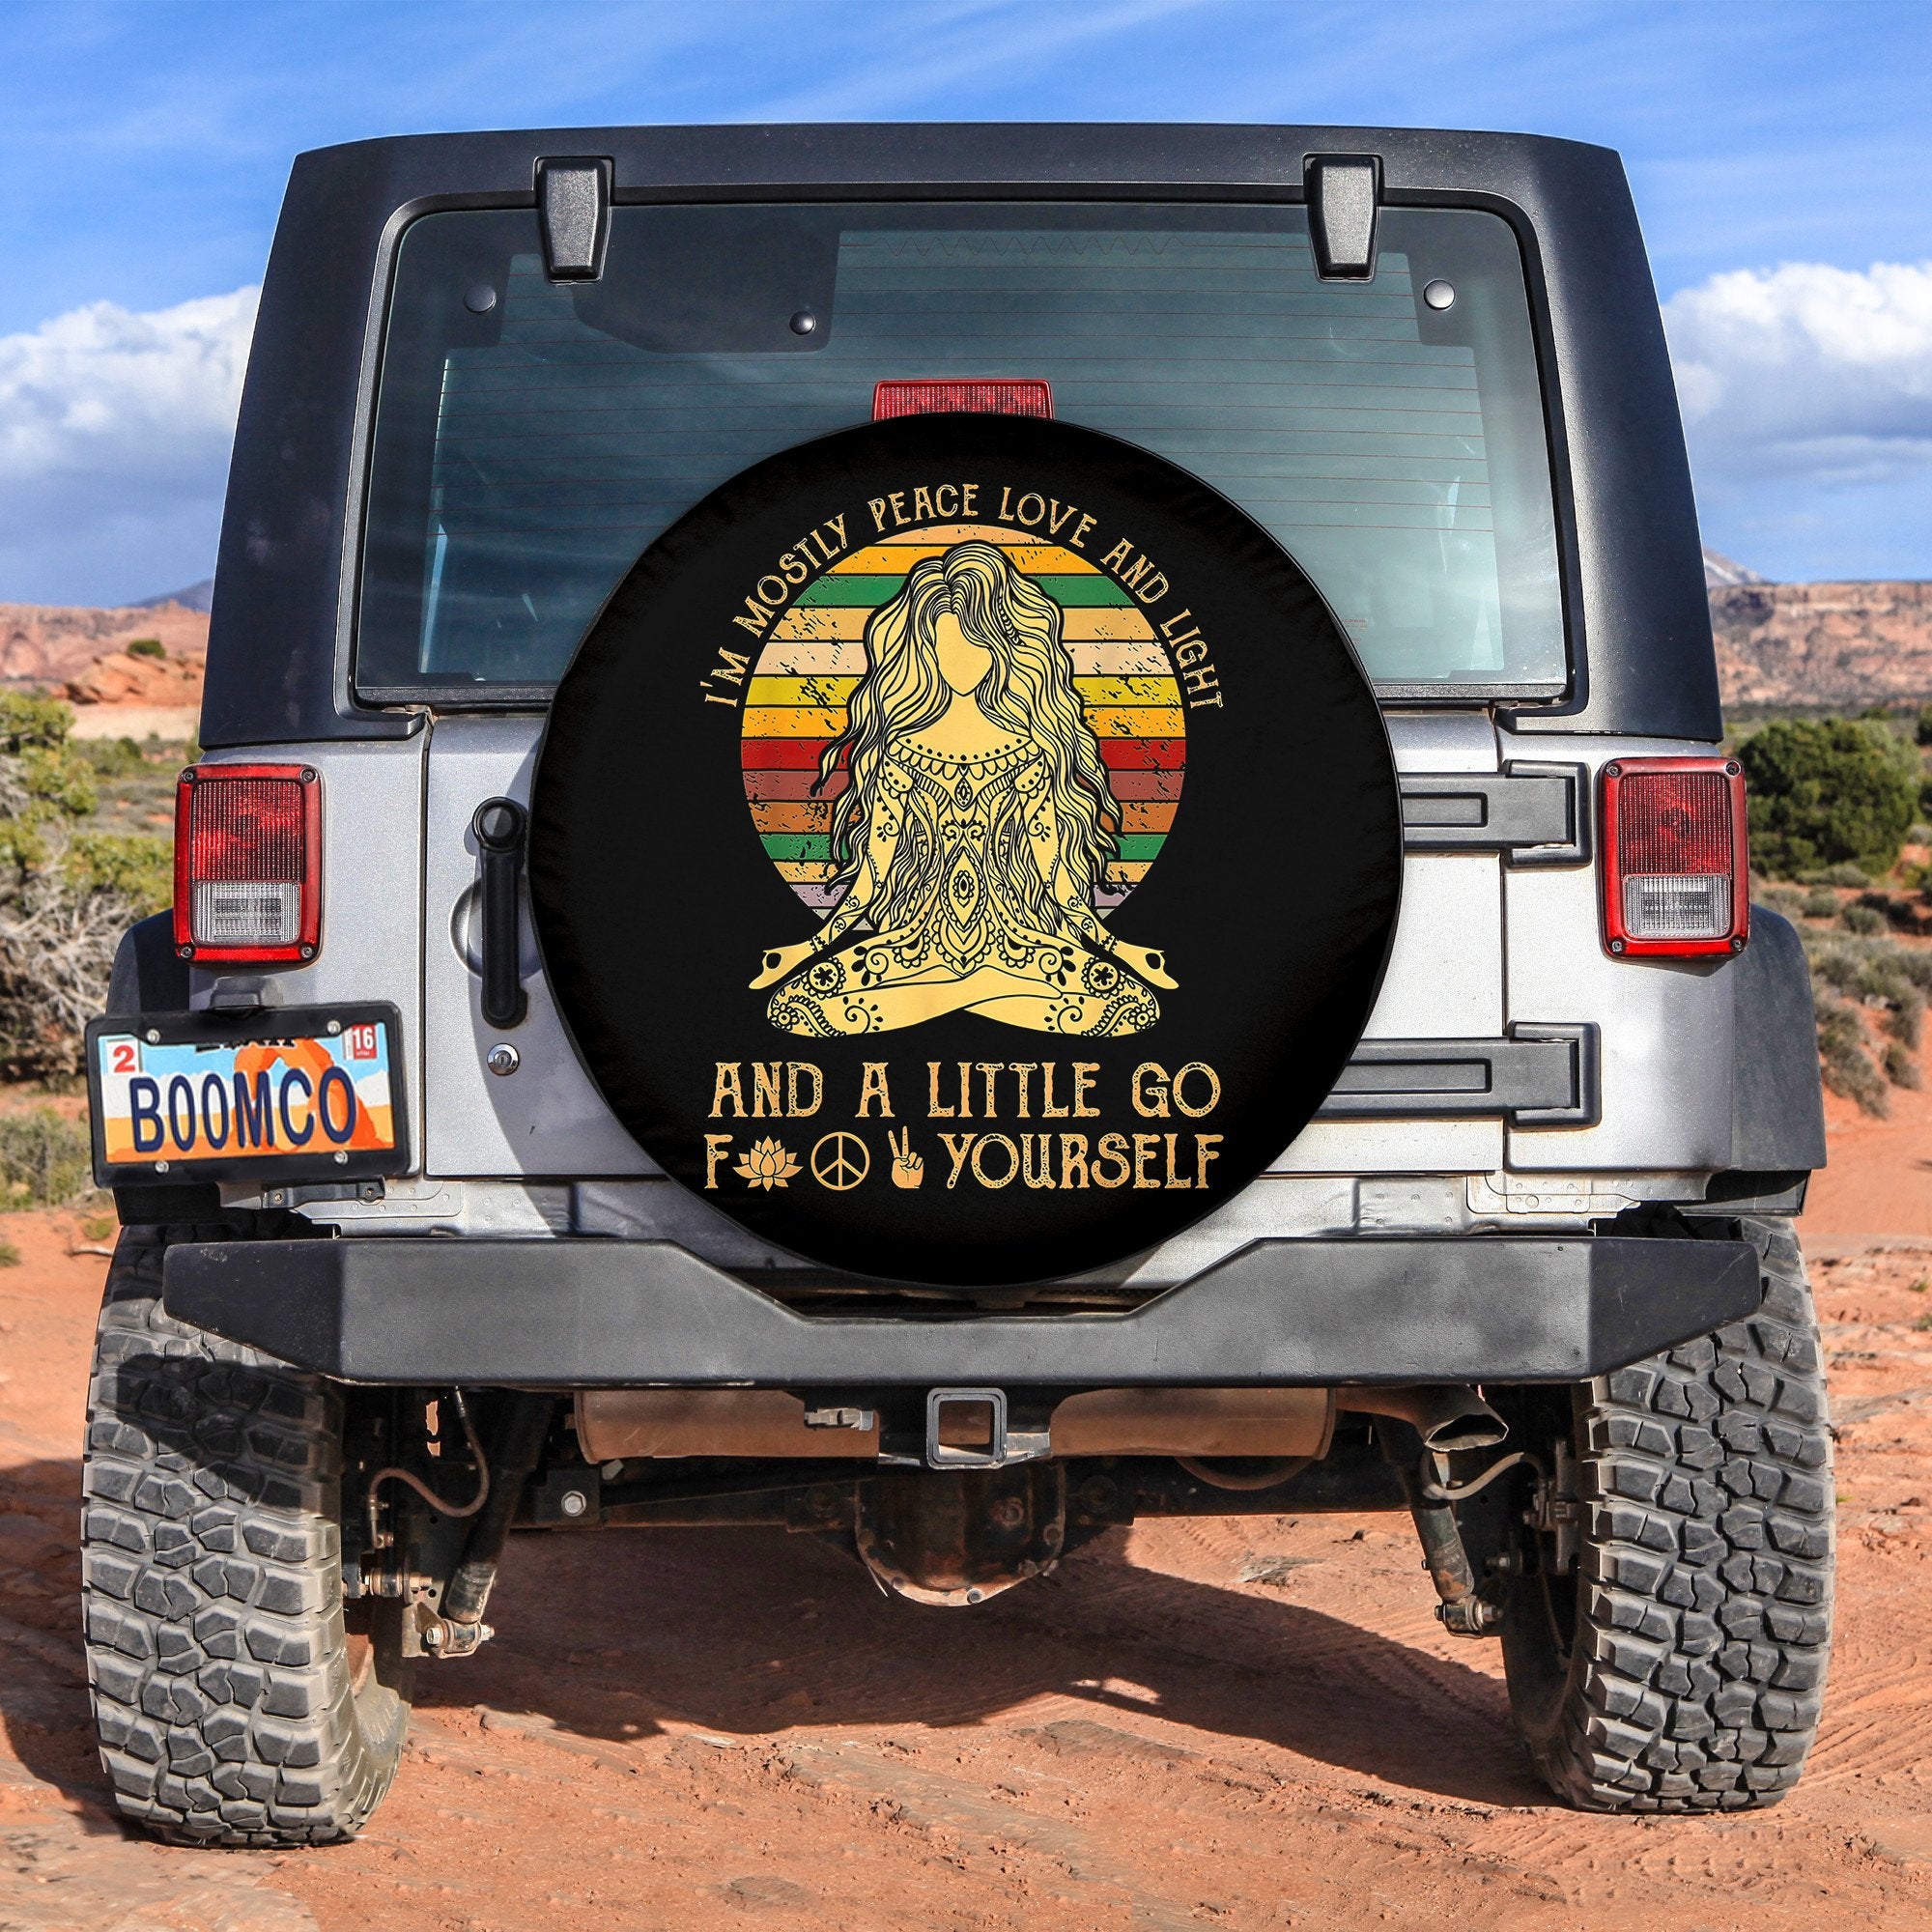 Peace Love And Light Yoga Spare Tire Cover Gift For Campers